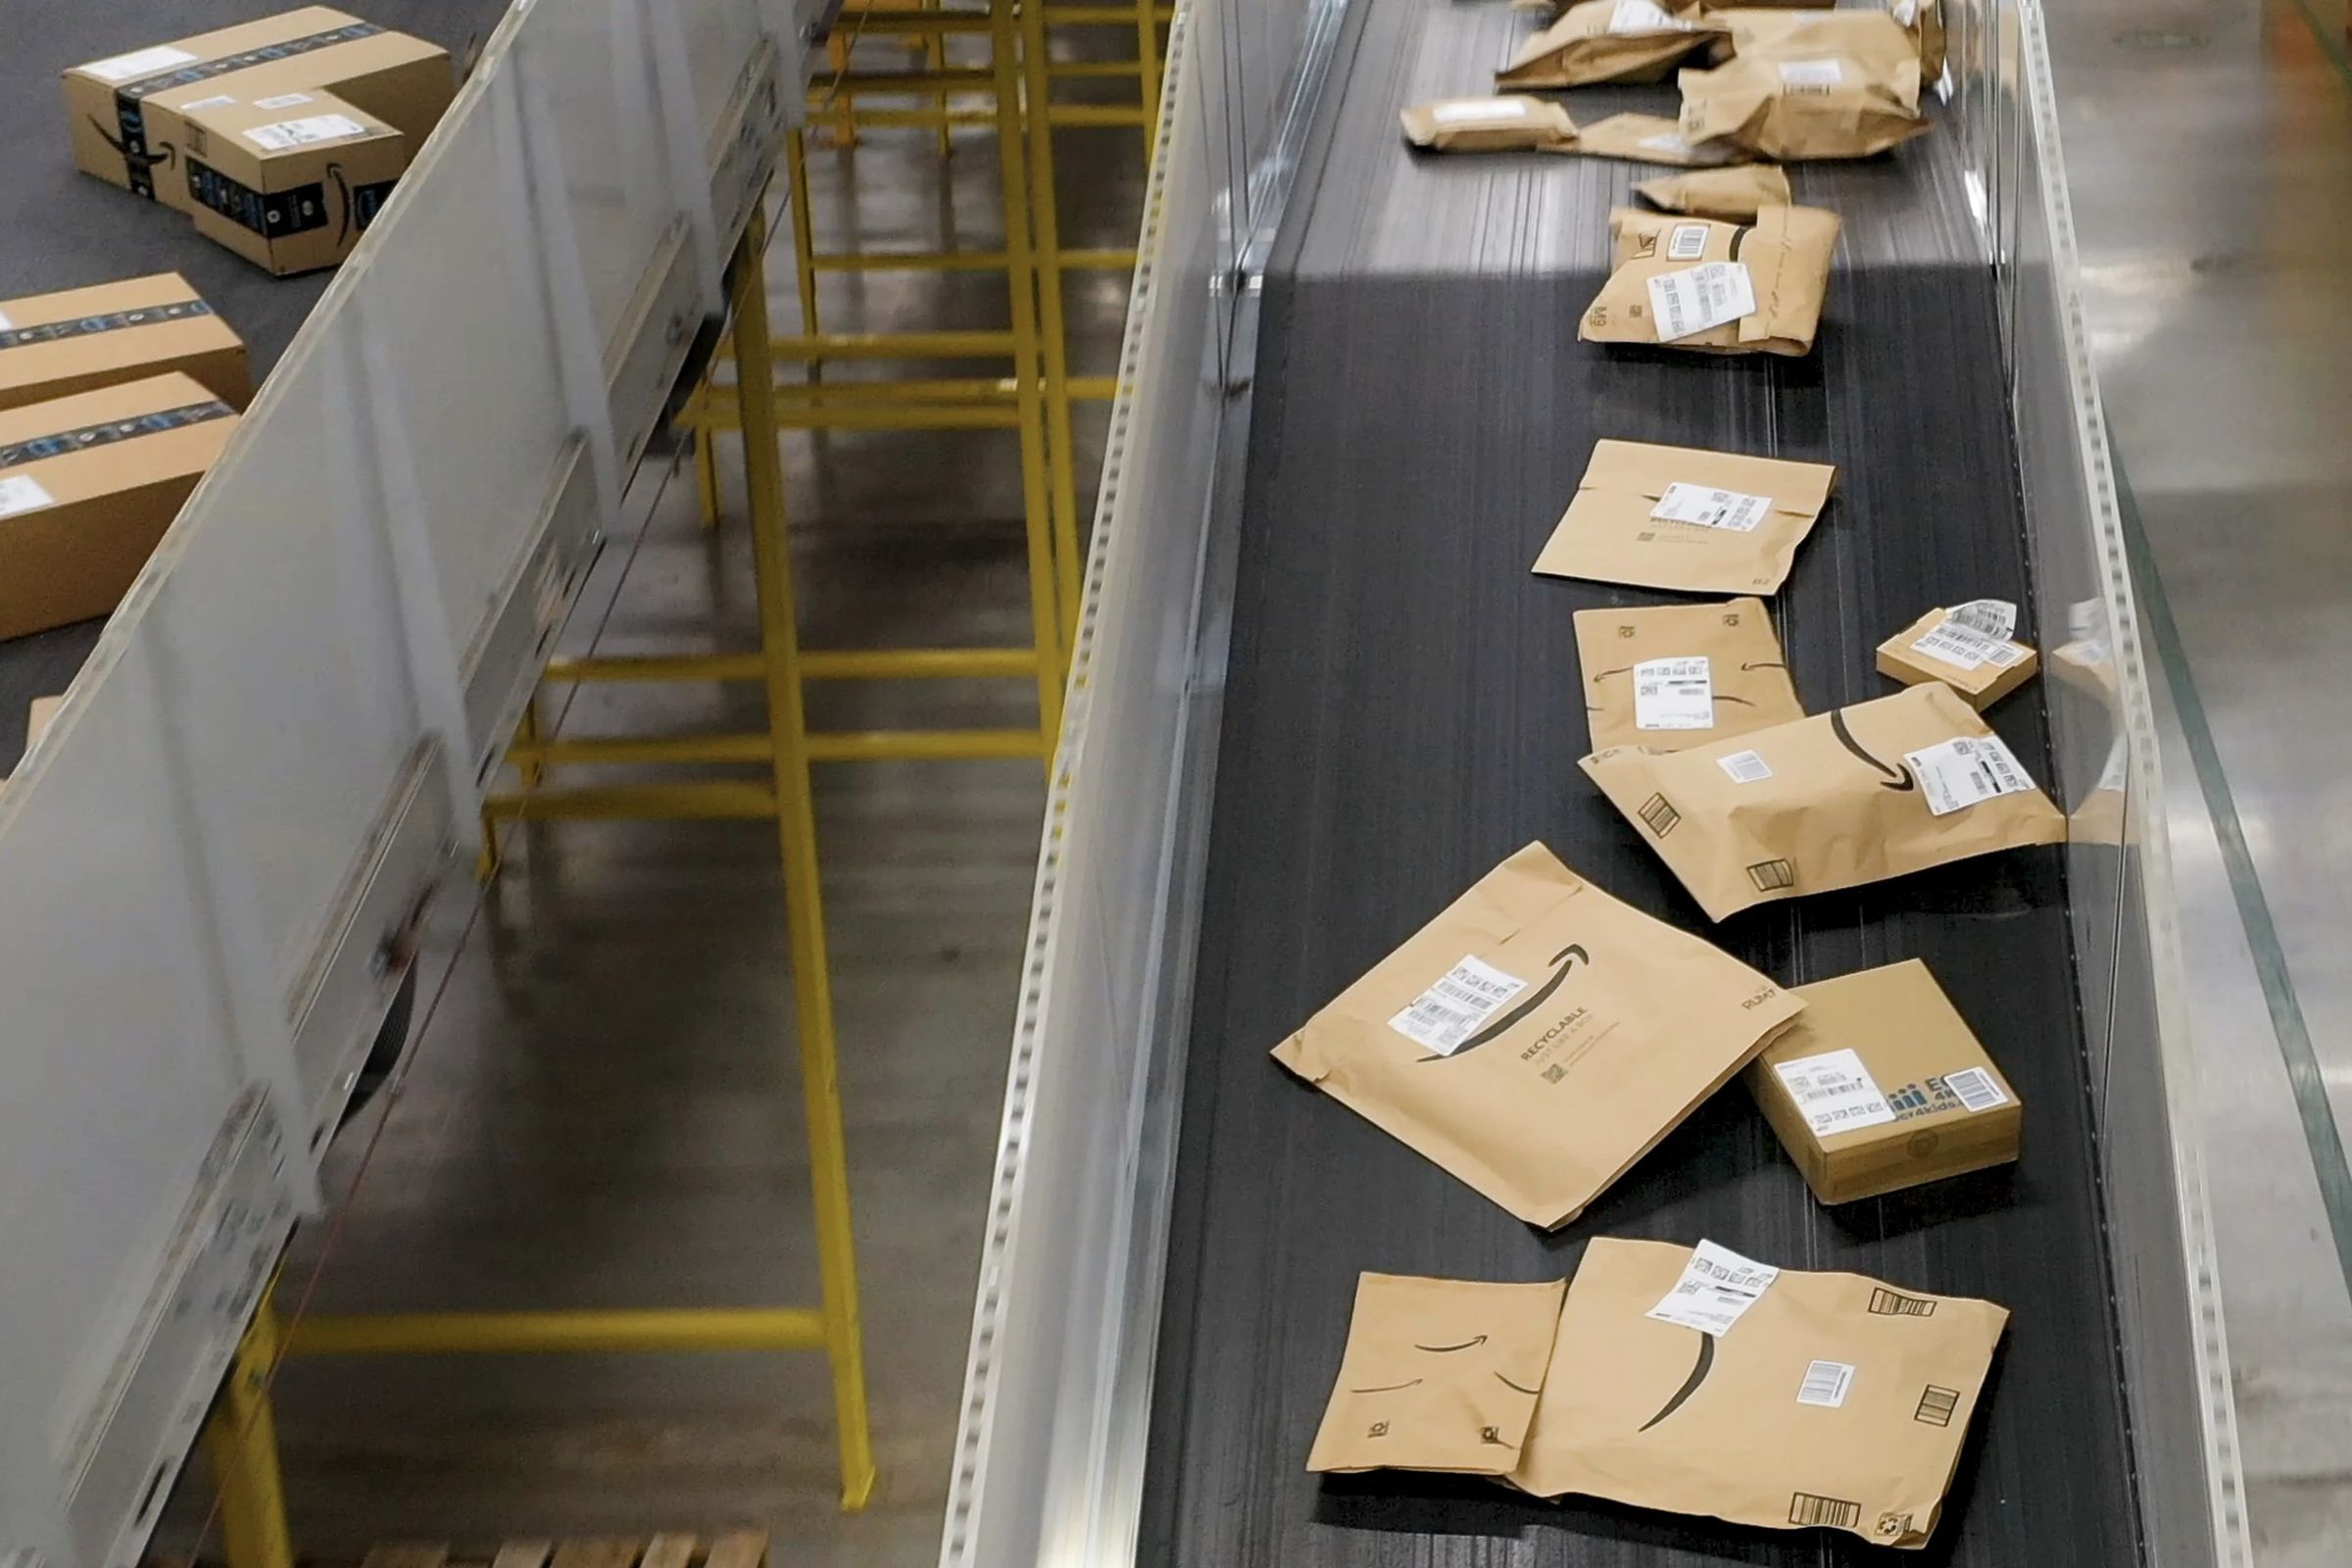 Conveyor belt with paper amazon packages